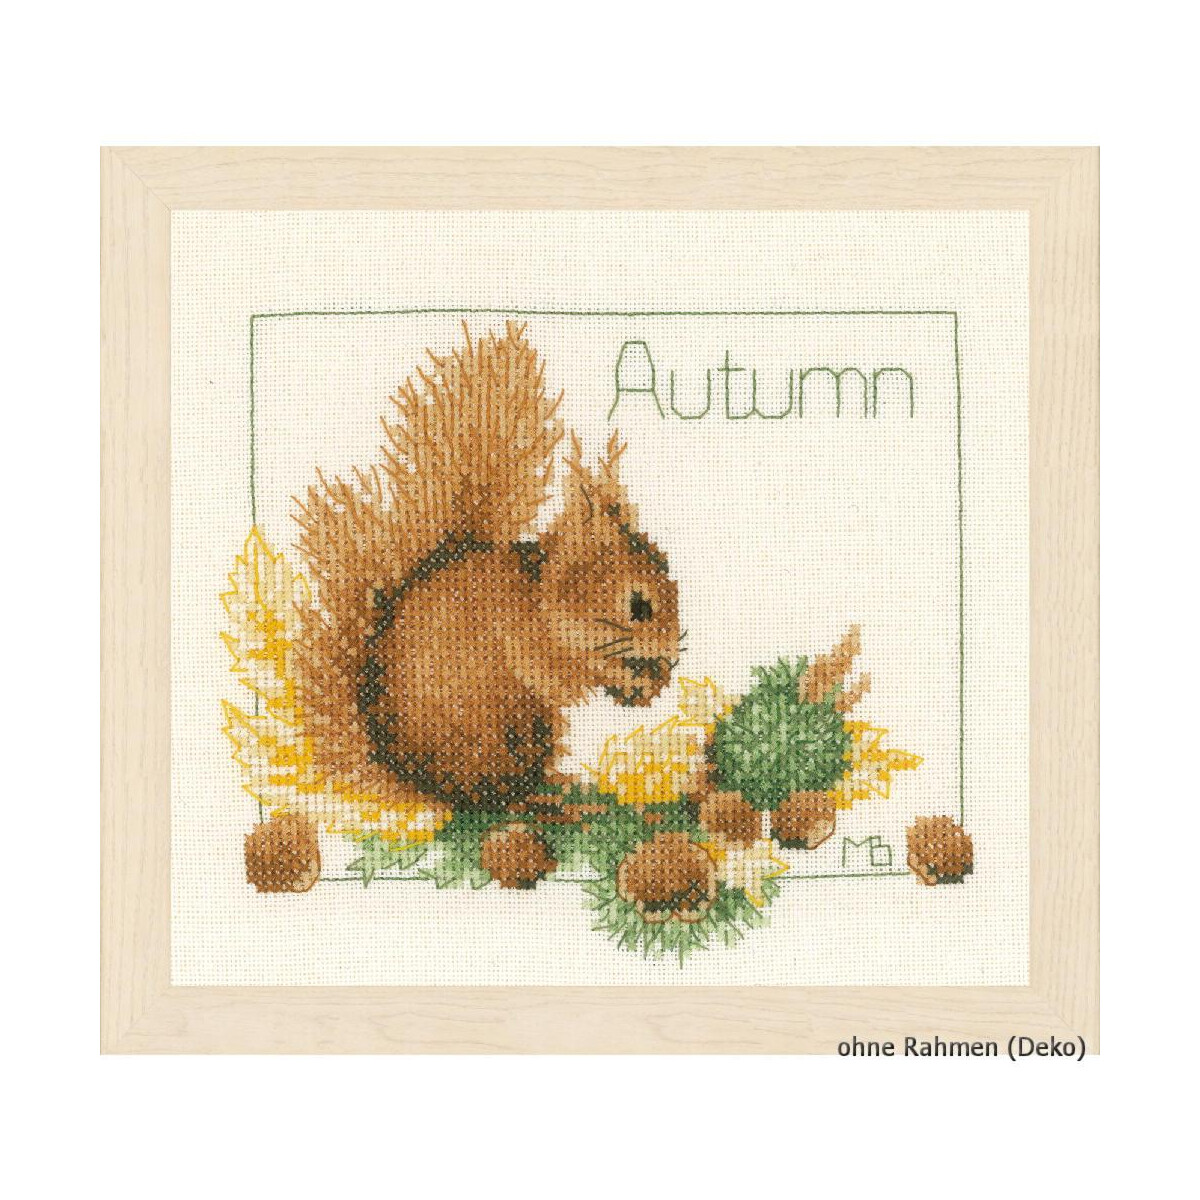 An embroidery pack (Lanarte) shows a brown squirrel...